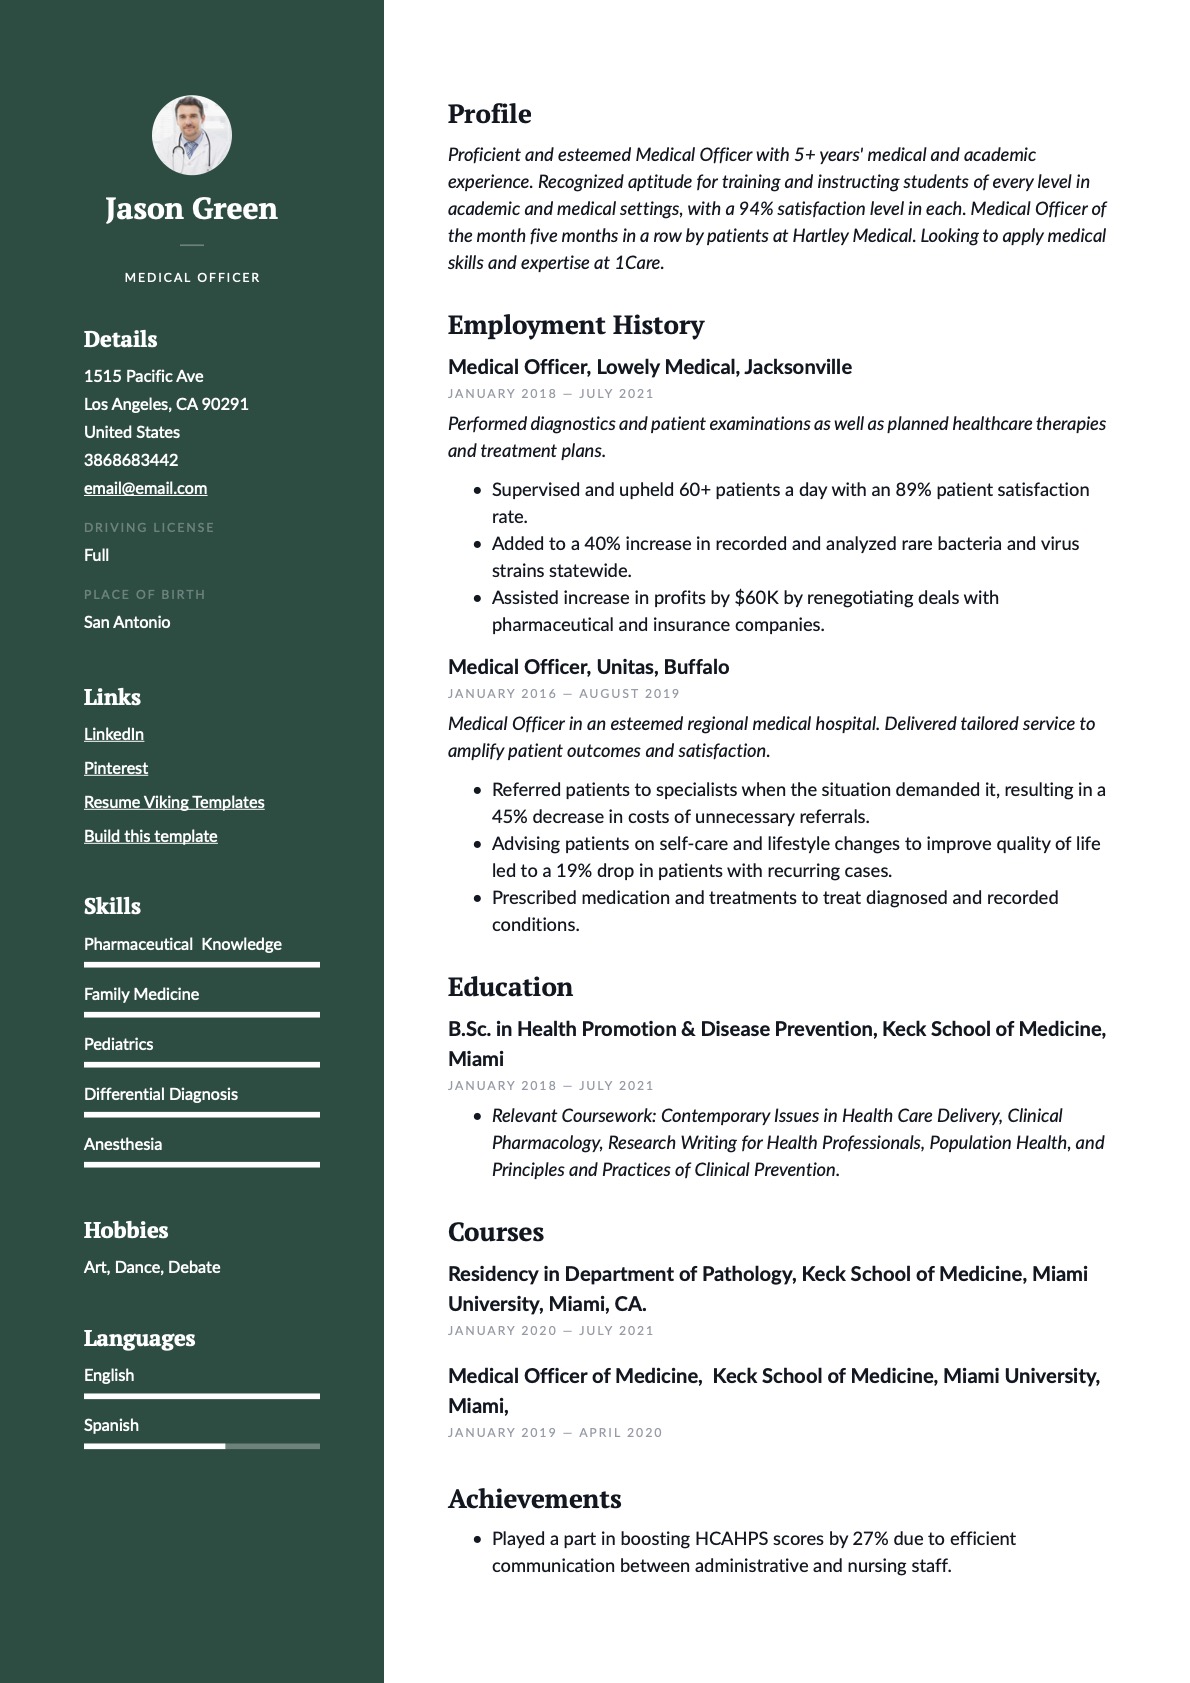 Professional Medical Officer Resume Green Example